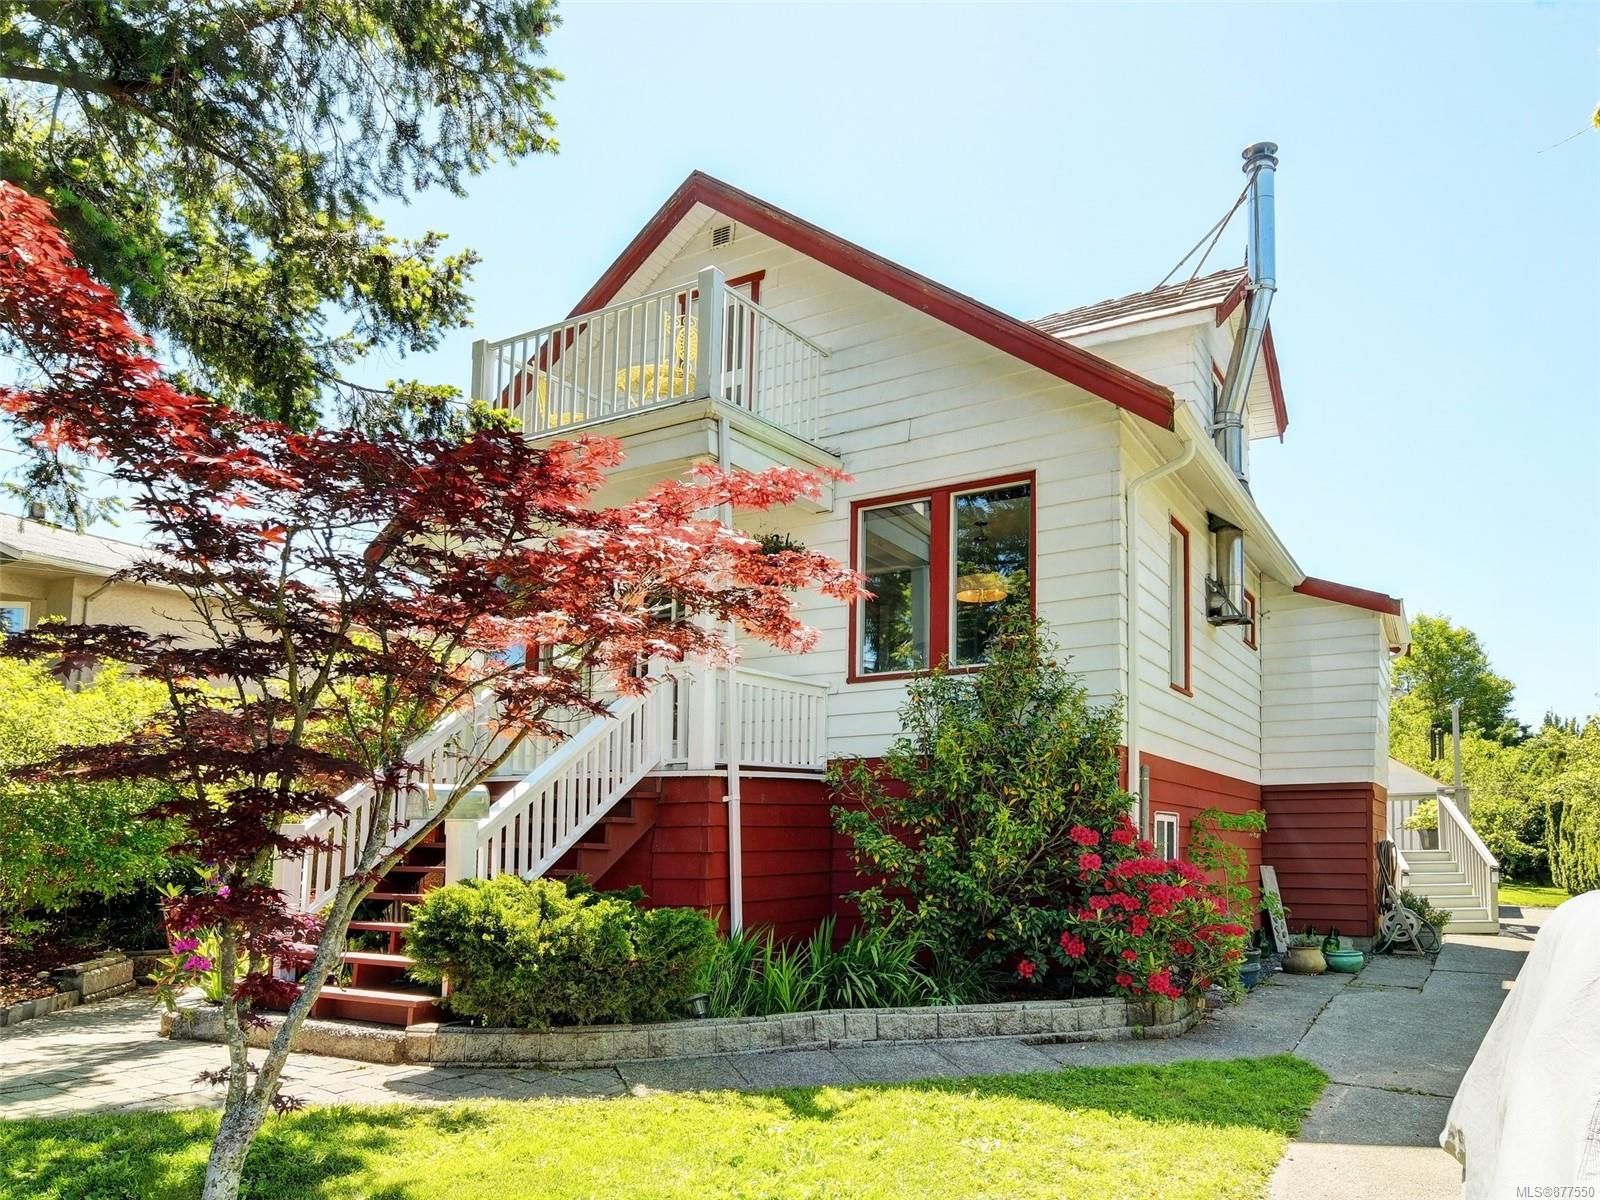 I have sold a property at 21 Lurline Ave in Saanich
